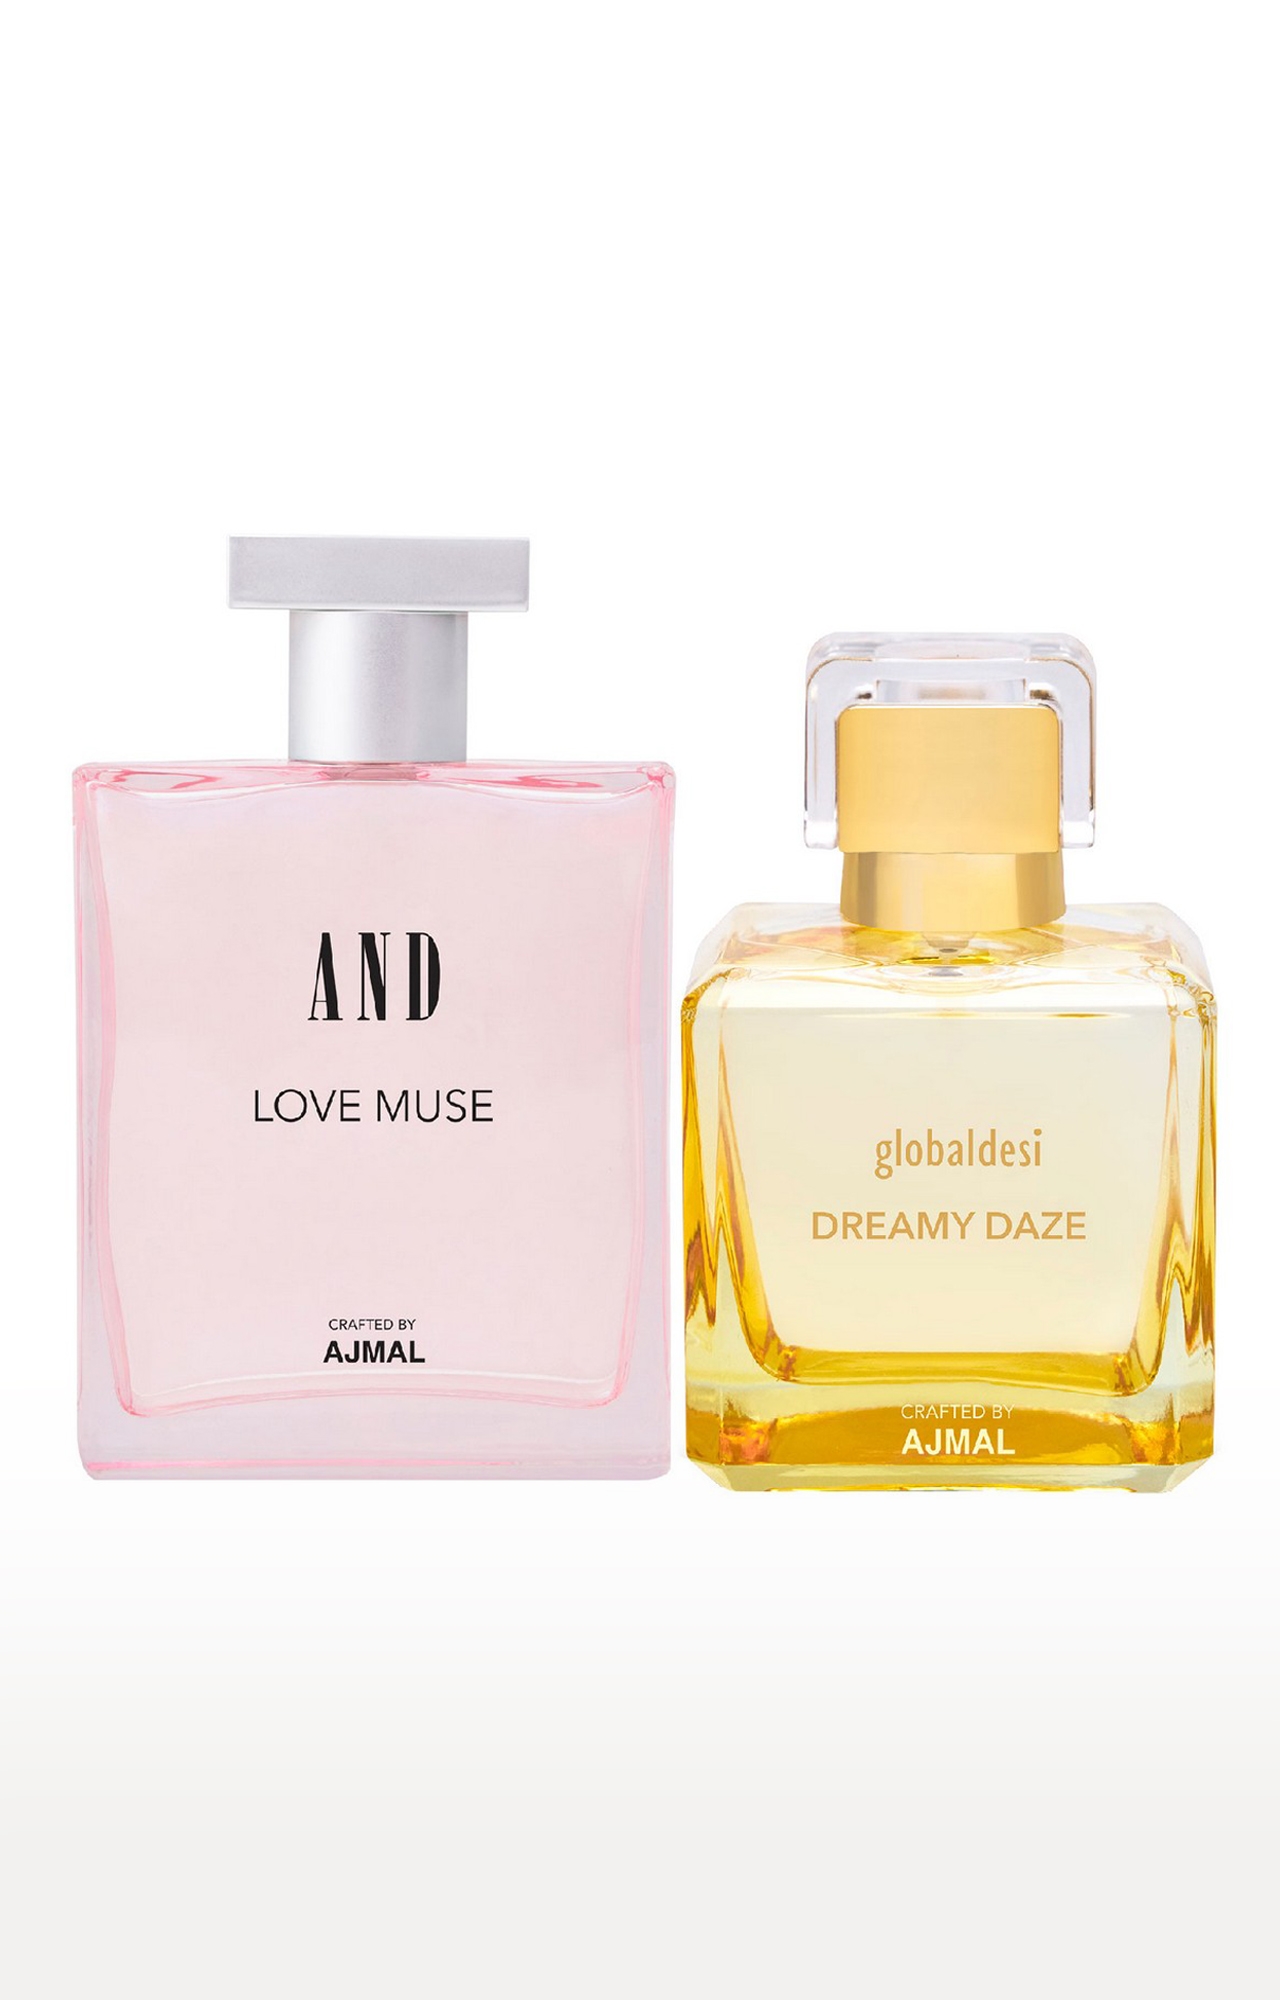 AND Crafted By Ajmal | And Love Muse Edp 50Ml & Global Desi Dreamy Daze Edp 100Ml 